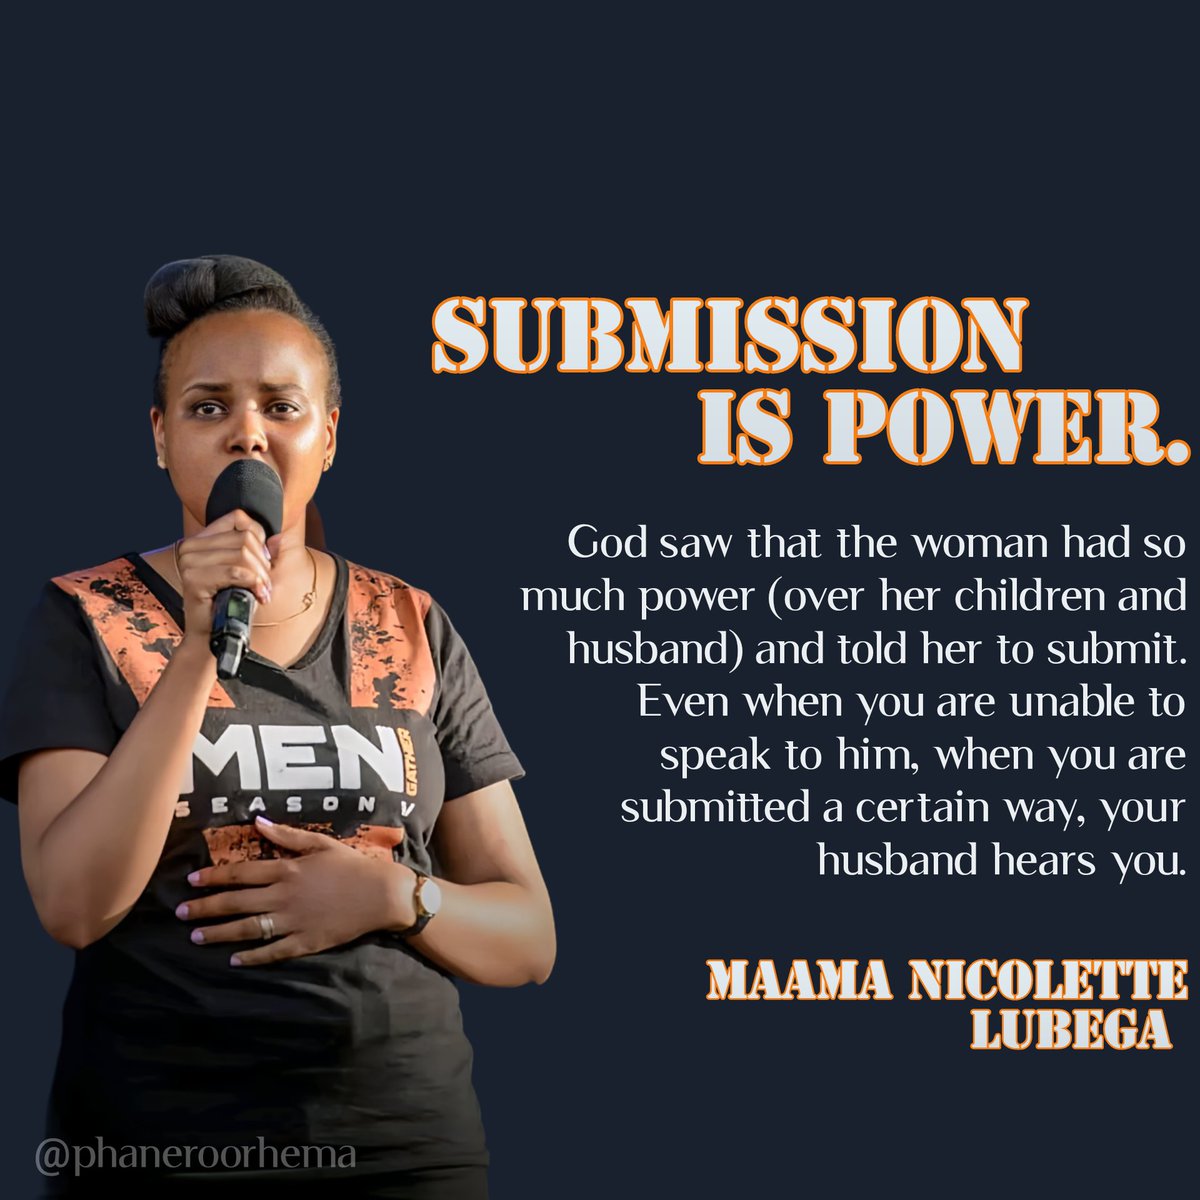 Submission is power.

God saw that the woman had so much power (over her children and husband) and told her to submit. Even when you are unable to speak to him, when you are submitted a certain way, your husband hears you.

Maama Nicolette Lubega 
#PhanerooRhema
#MyGreatPrice2024